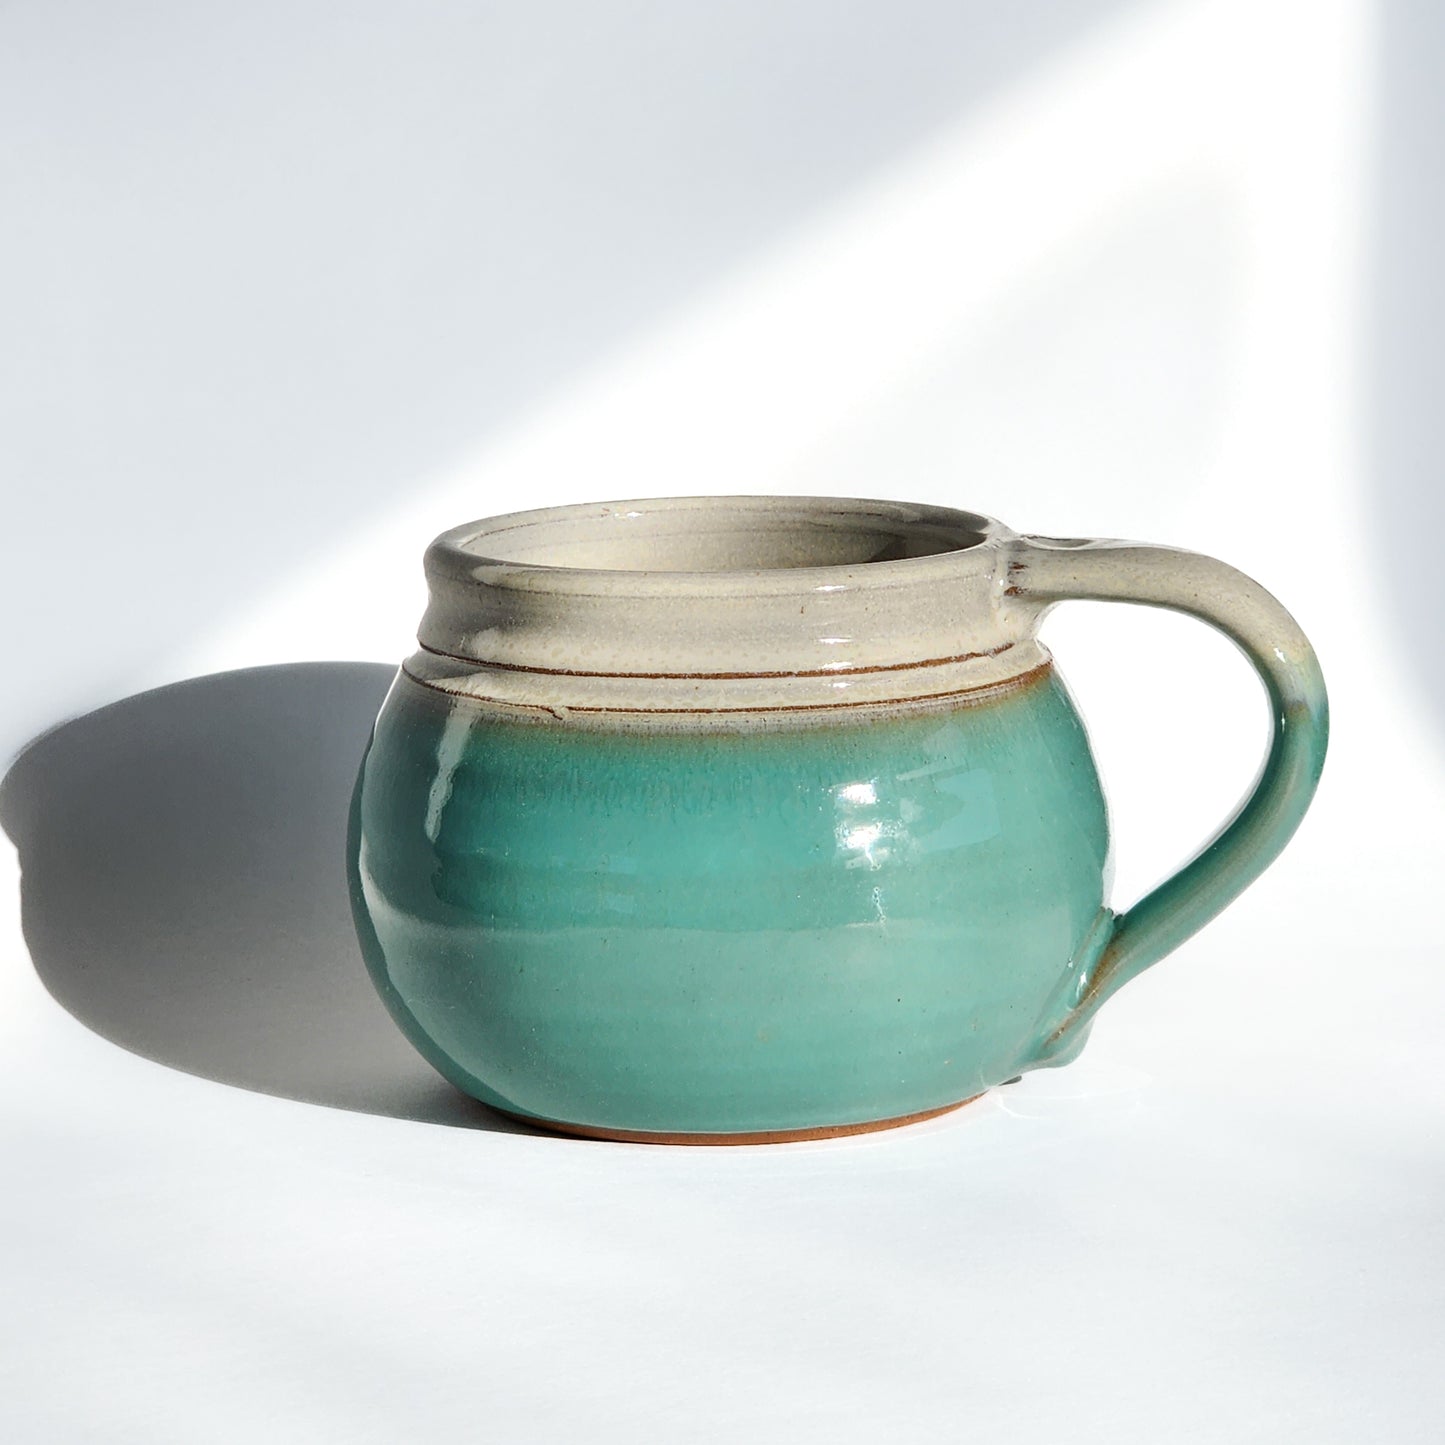 Image: Clinton Pottery's 24 oz Cereal/Soup Mug in Sky Blue – A serene and refreshing choice for your kitchen, this machine washable mug seamlessly blends artistry with functionality. The soothing Sky Blue color adds a touch of tranquility, reminiscent of clear skies and calming waters. Perfect for enjoying your favorite cereal or soup, bringing a breath of peaceful elegance to your dining experience.